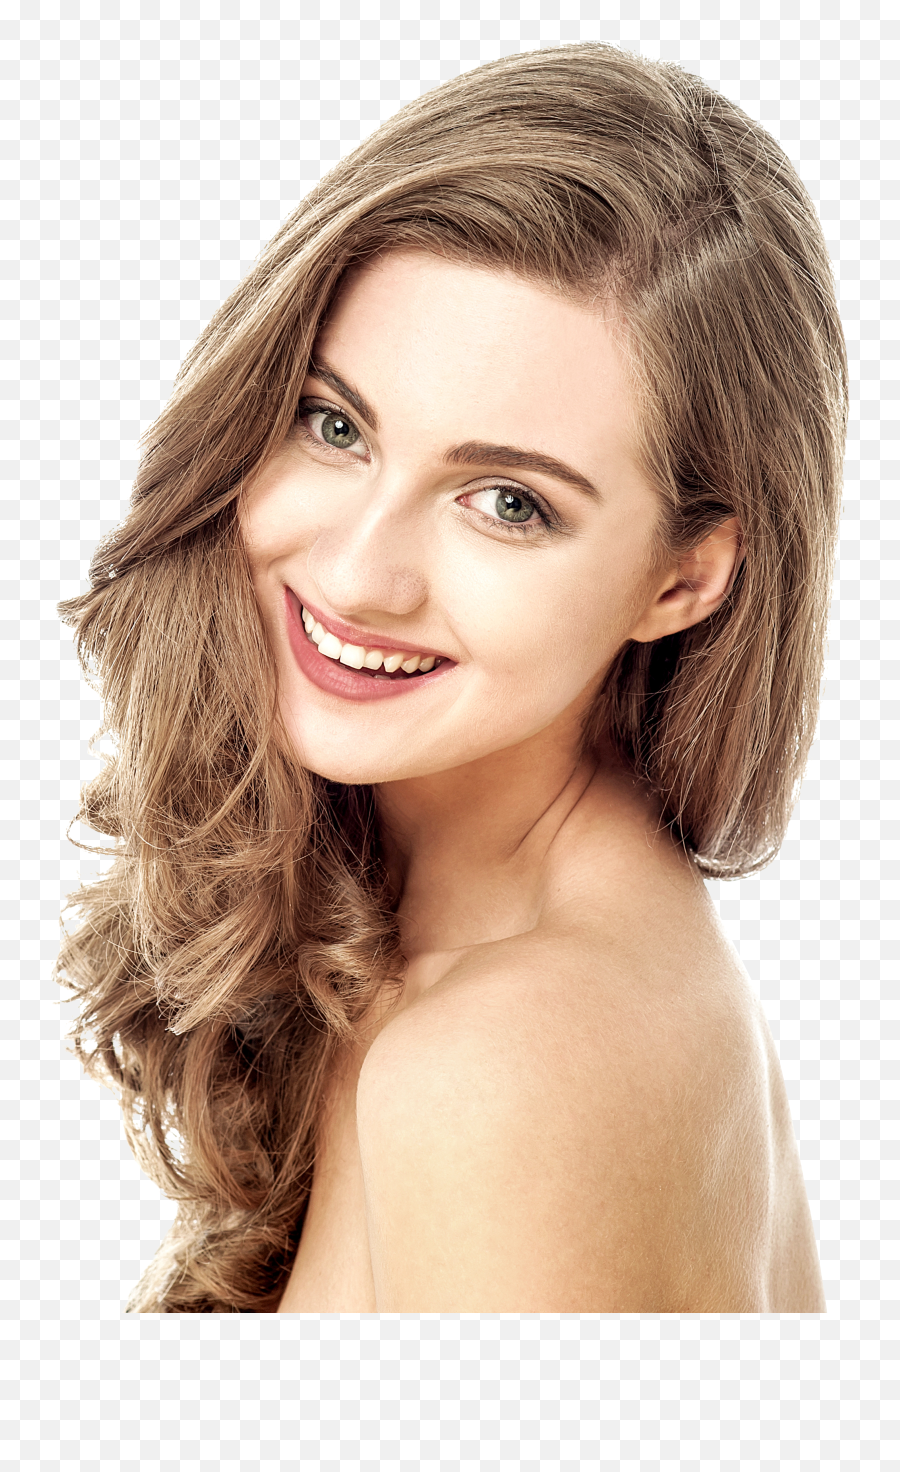 Download Beautiful Girl Png Image For Free Transparent